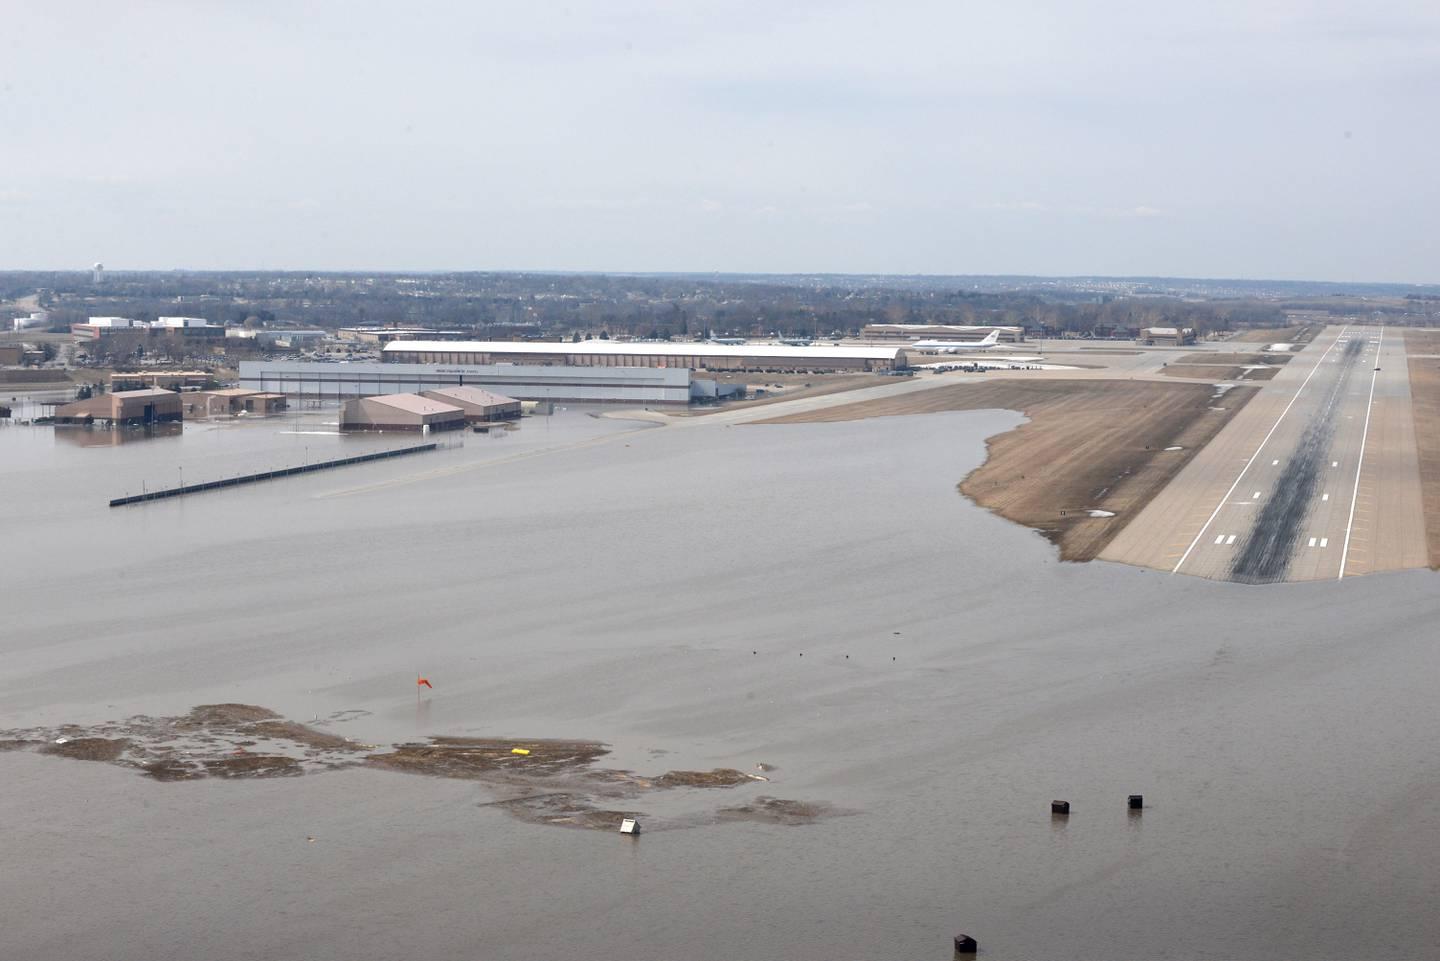 Thumbnail: Offutt Air Force Base and surrounding areas were flooded March 17, 2019, after rapid melting of record-setting snowfall led to widespread flooding across Nebraska. (Tech Sgt. Rachelle Blake/Air Force)